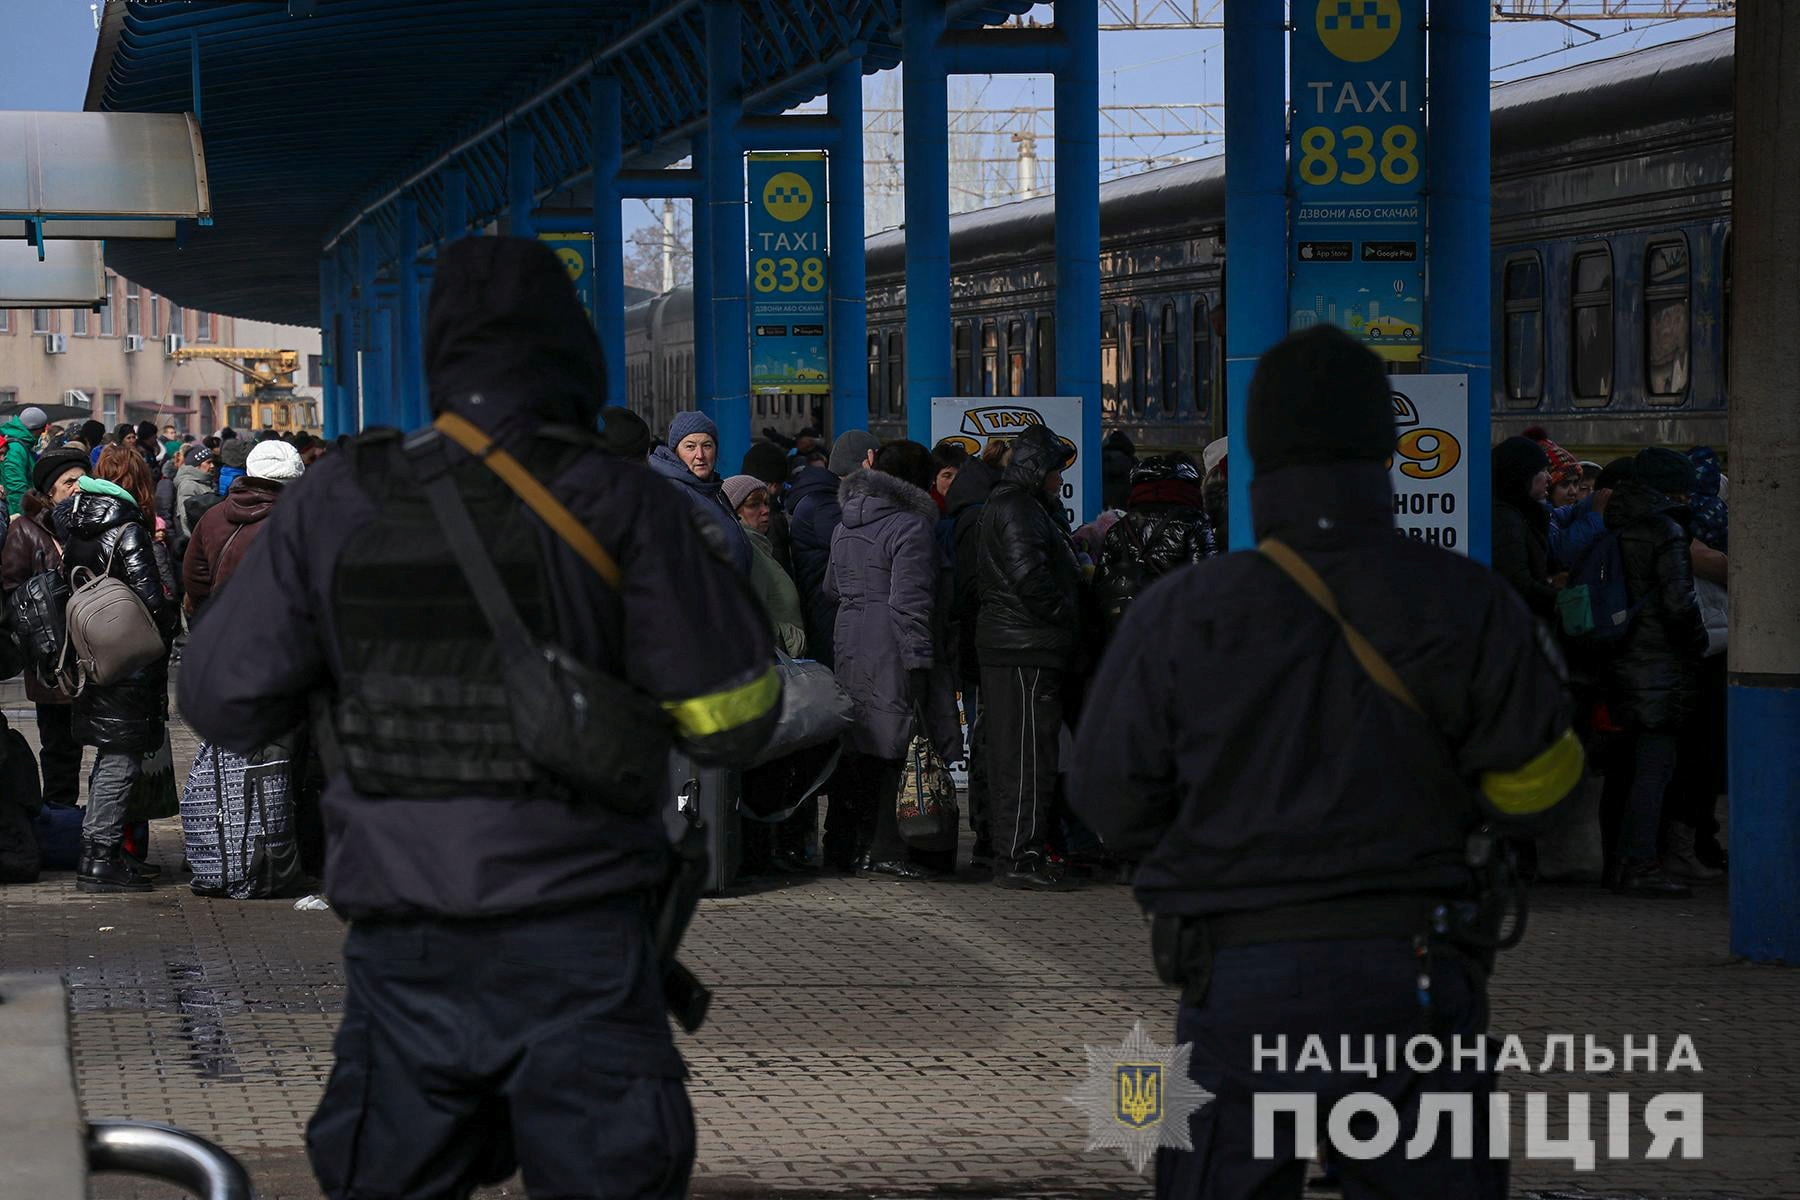 People fleeing from Mariupol stand at railway station in Zaporizhzhia